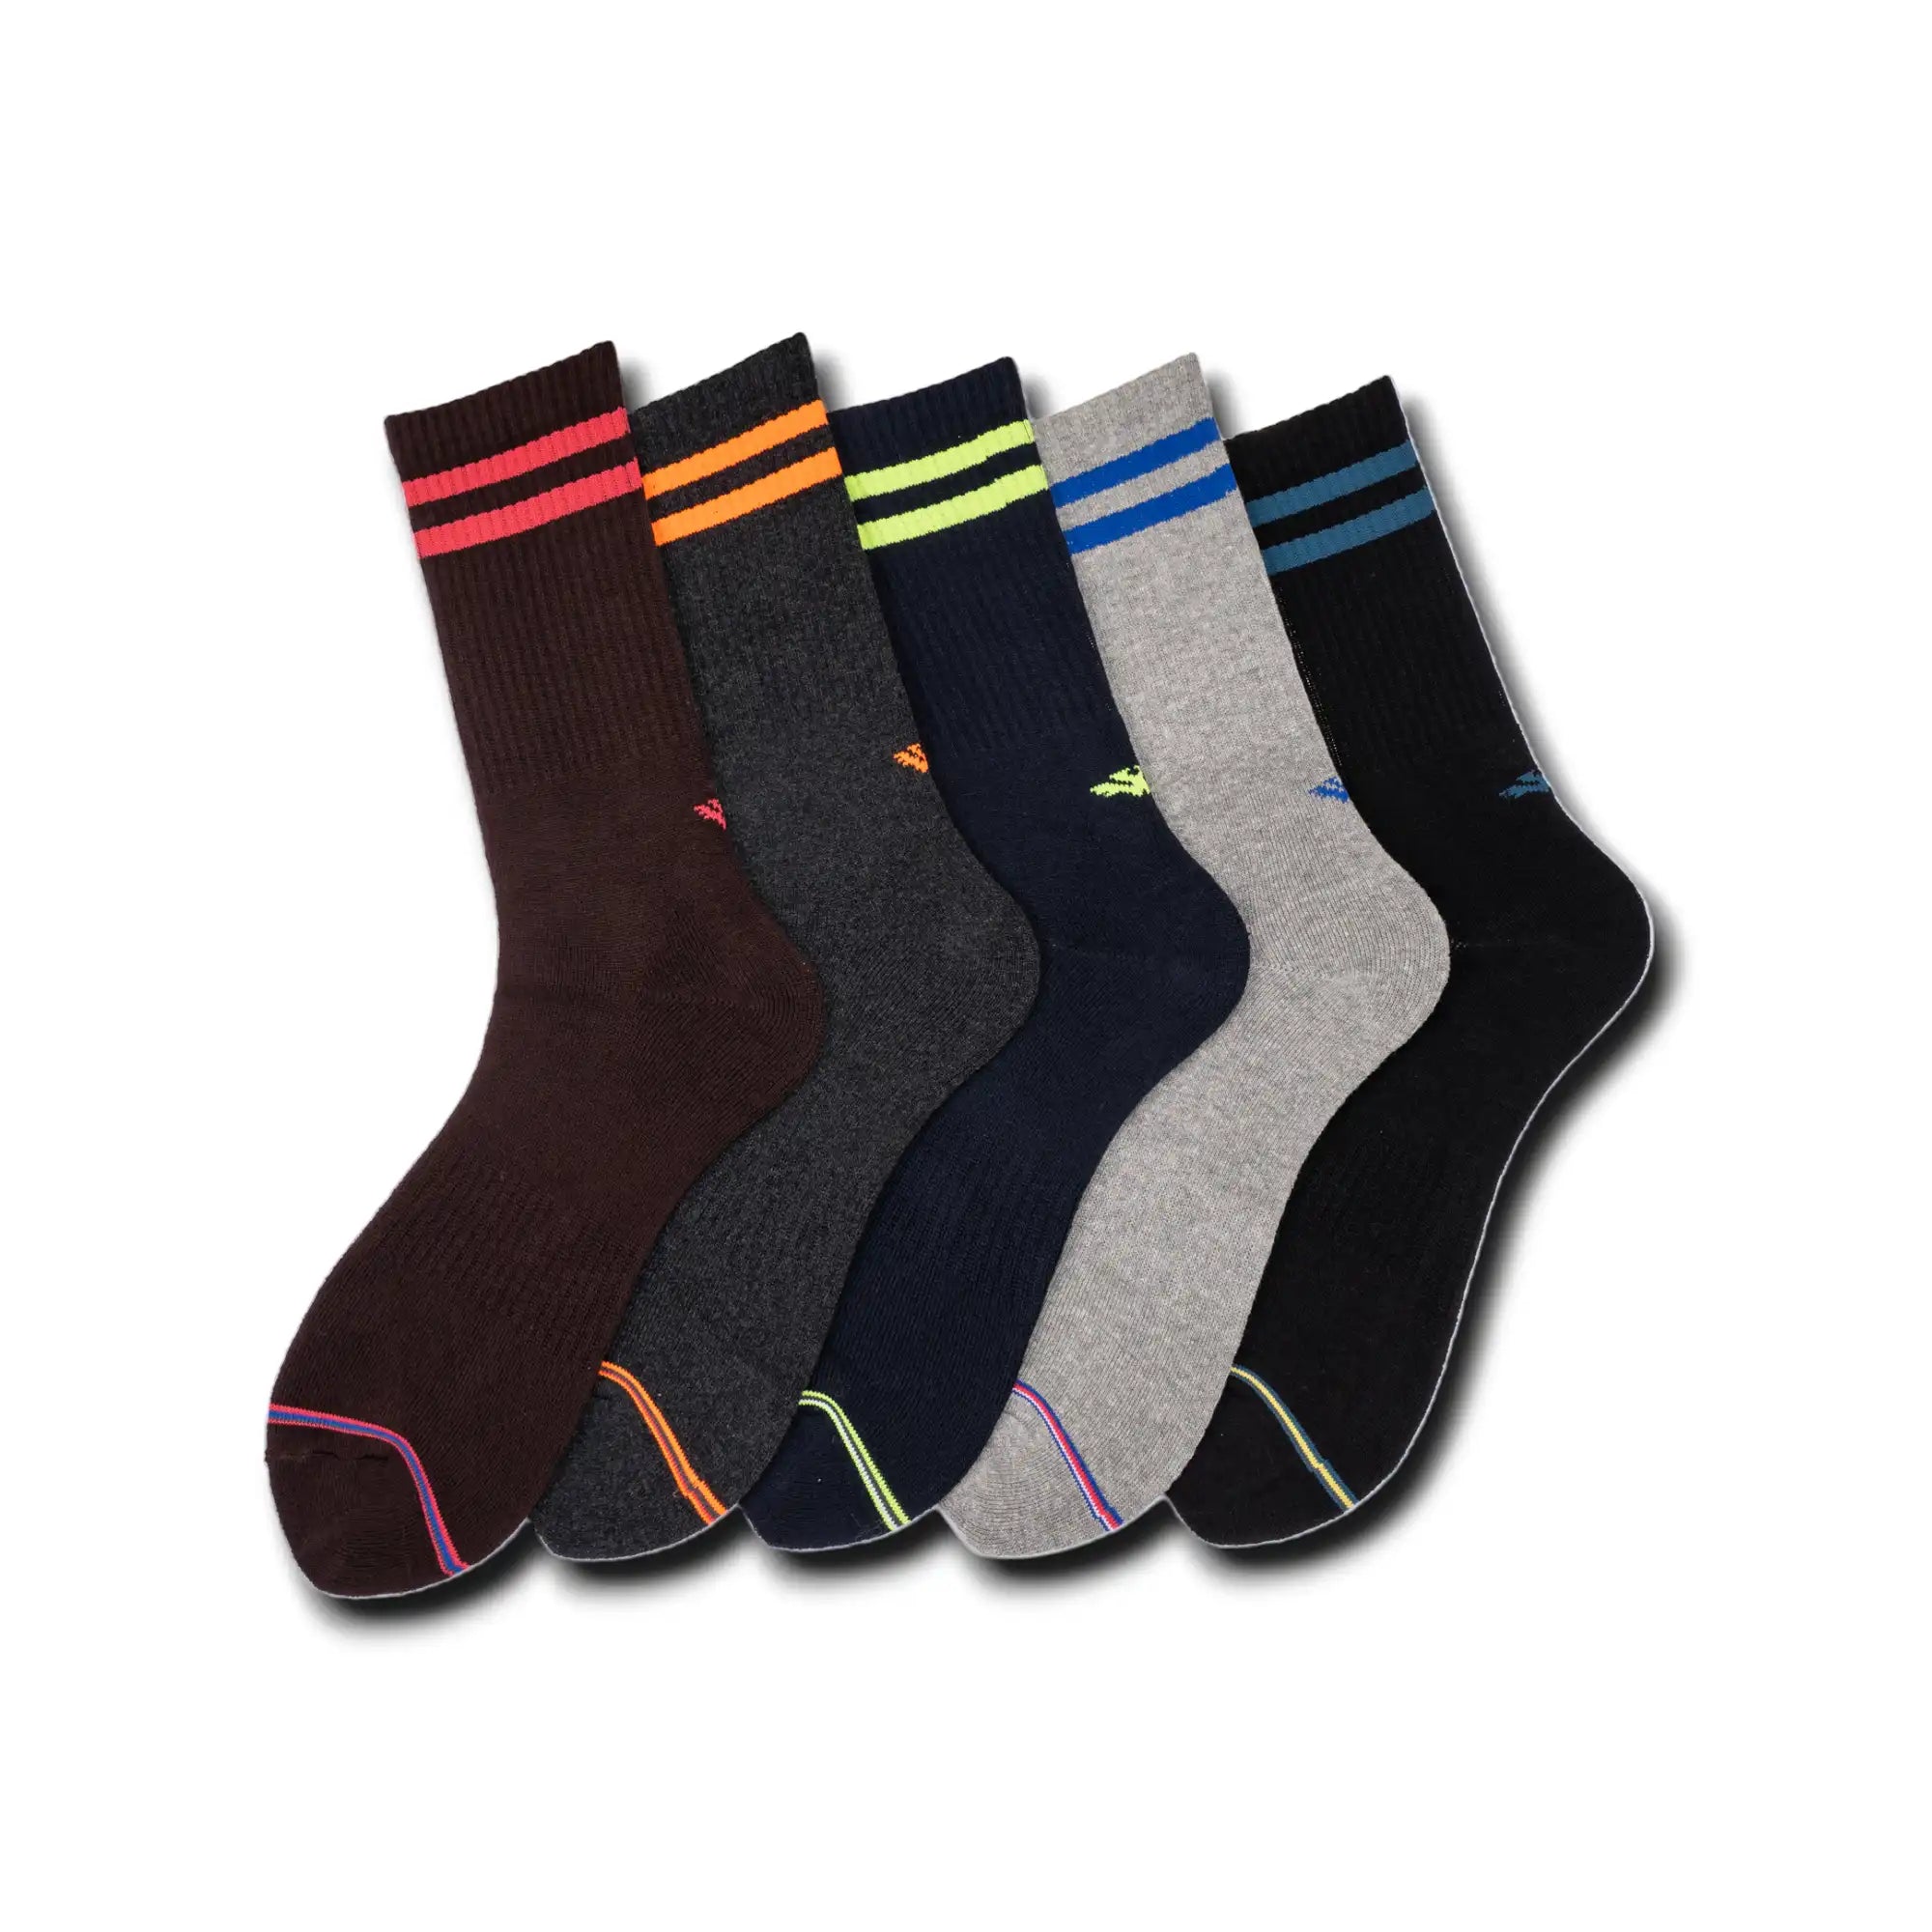 Young Wings Men's Multi Colour Cotton Fabric Design Full Length Socks - Pack of 3, Style no. M1-372